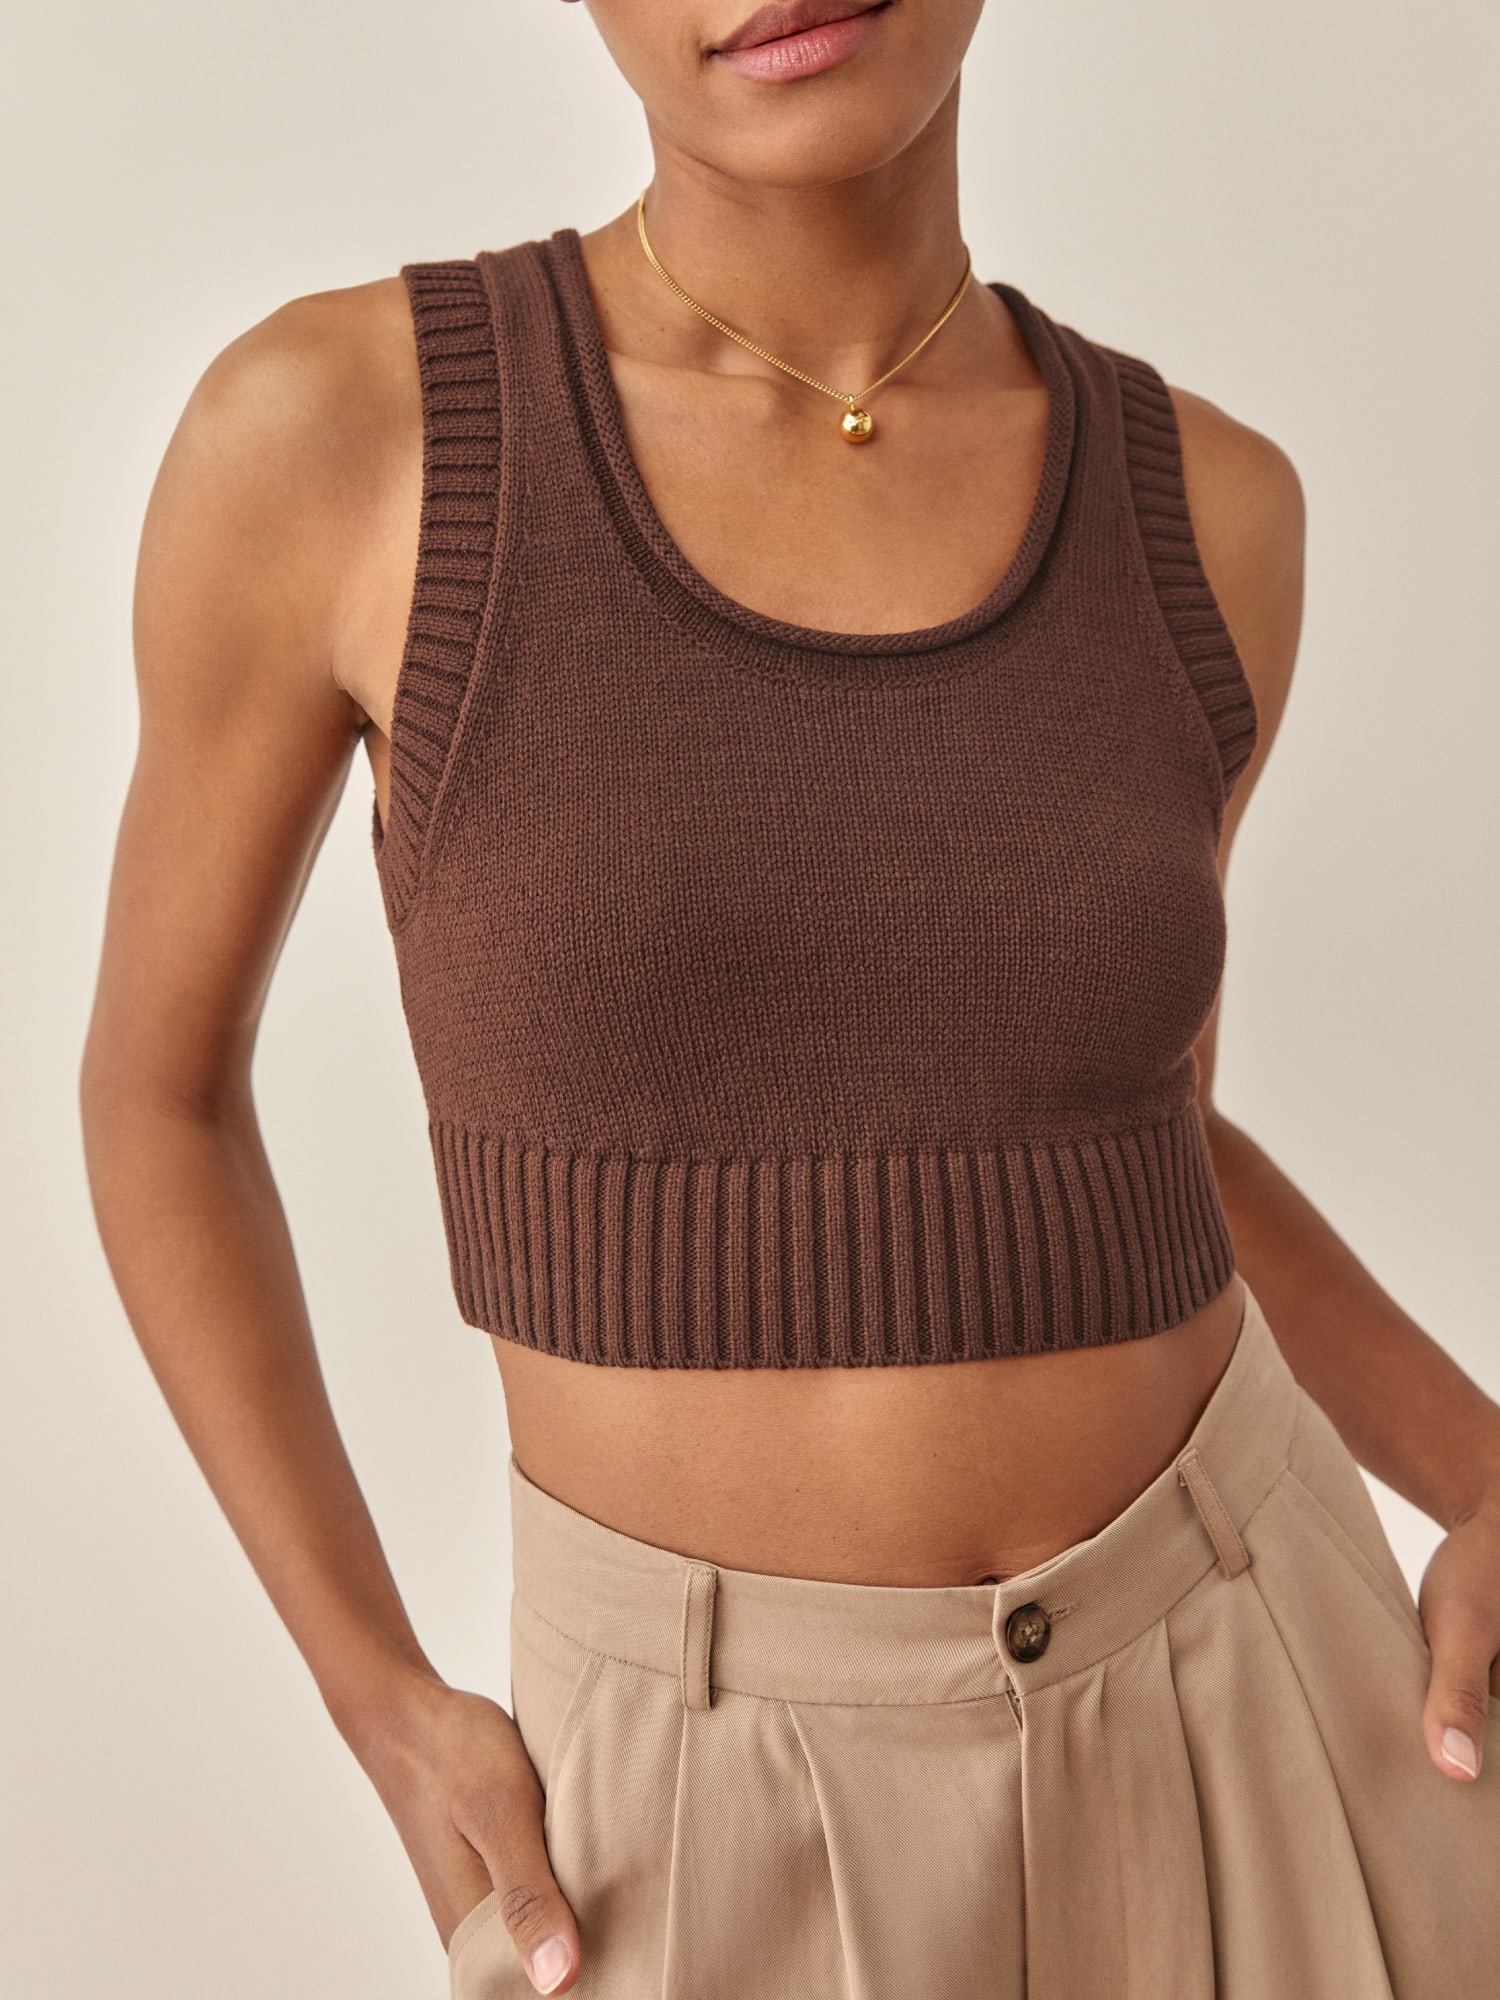 Norma Cotton Sweater Tank - Sustainable Sweaters